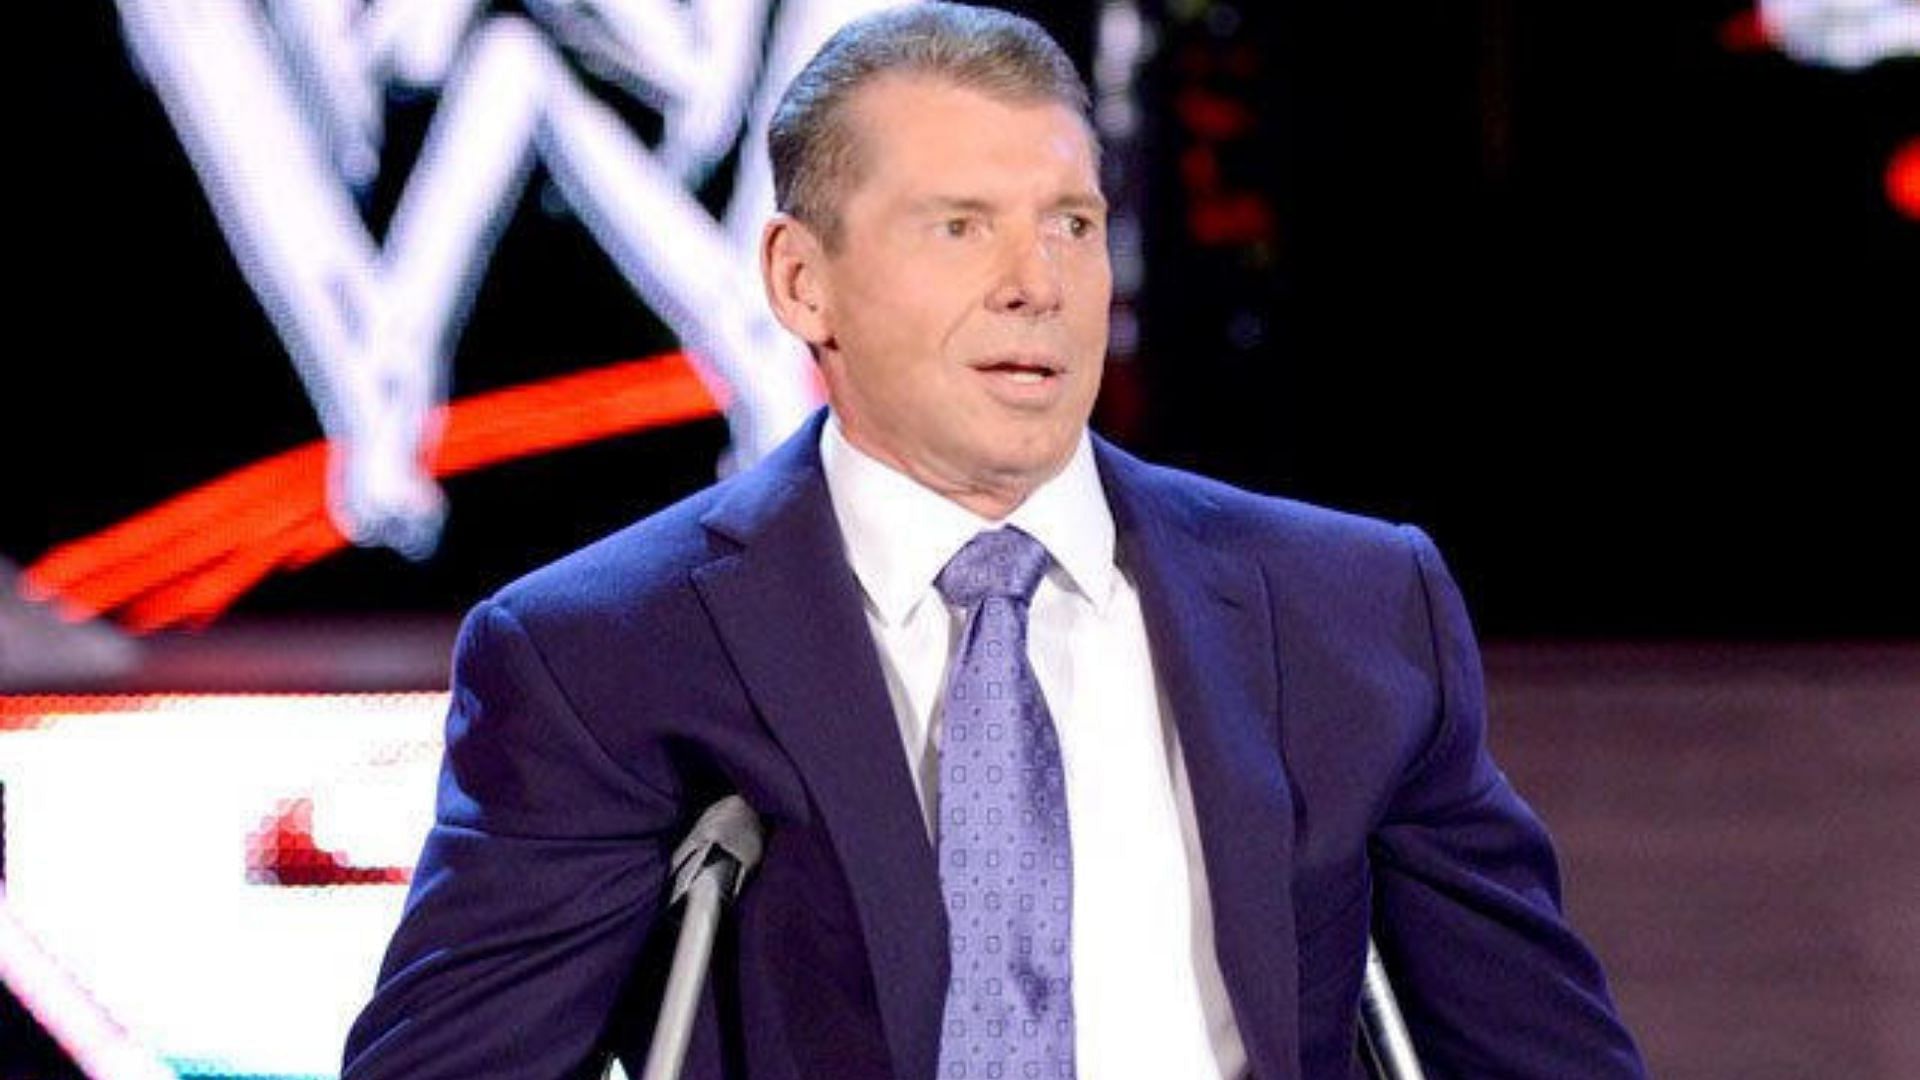 Vince McMahon has been removed from WWE